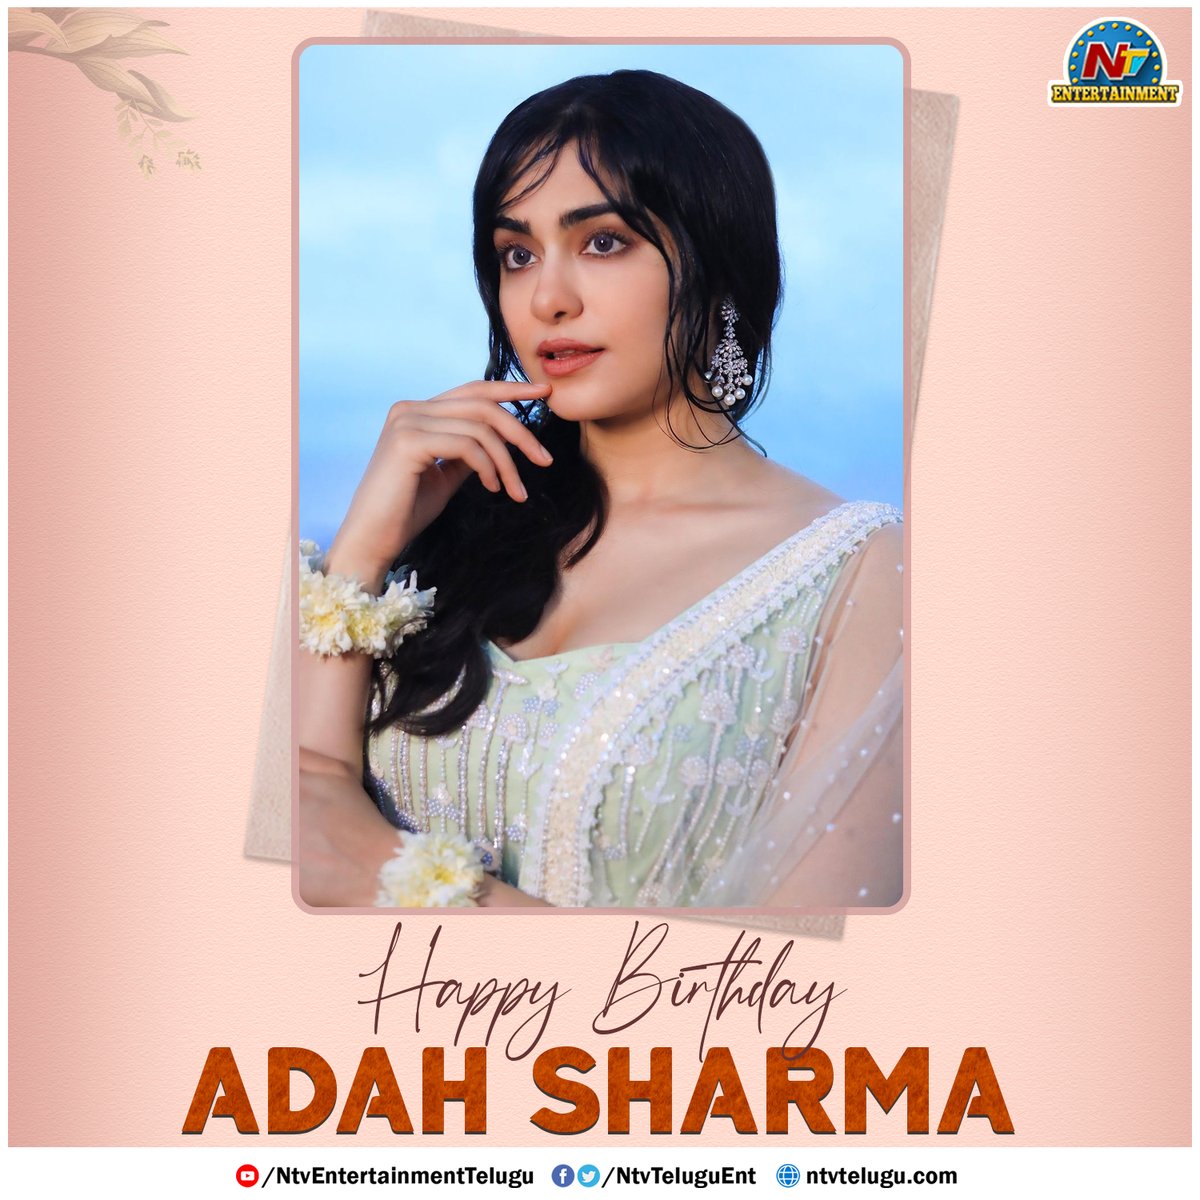 Join us in Wishing @adah_sharma A Very Happy Birthday

#HappybirthdayAdahSharma #HBDAdahSharma #AdahSharma #NTVENT